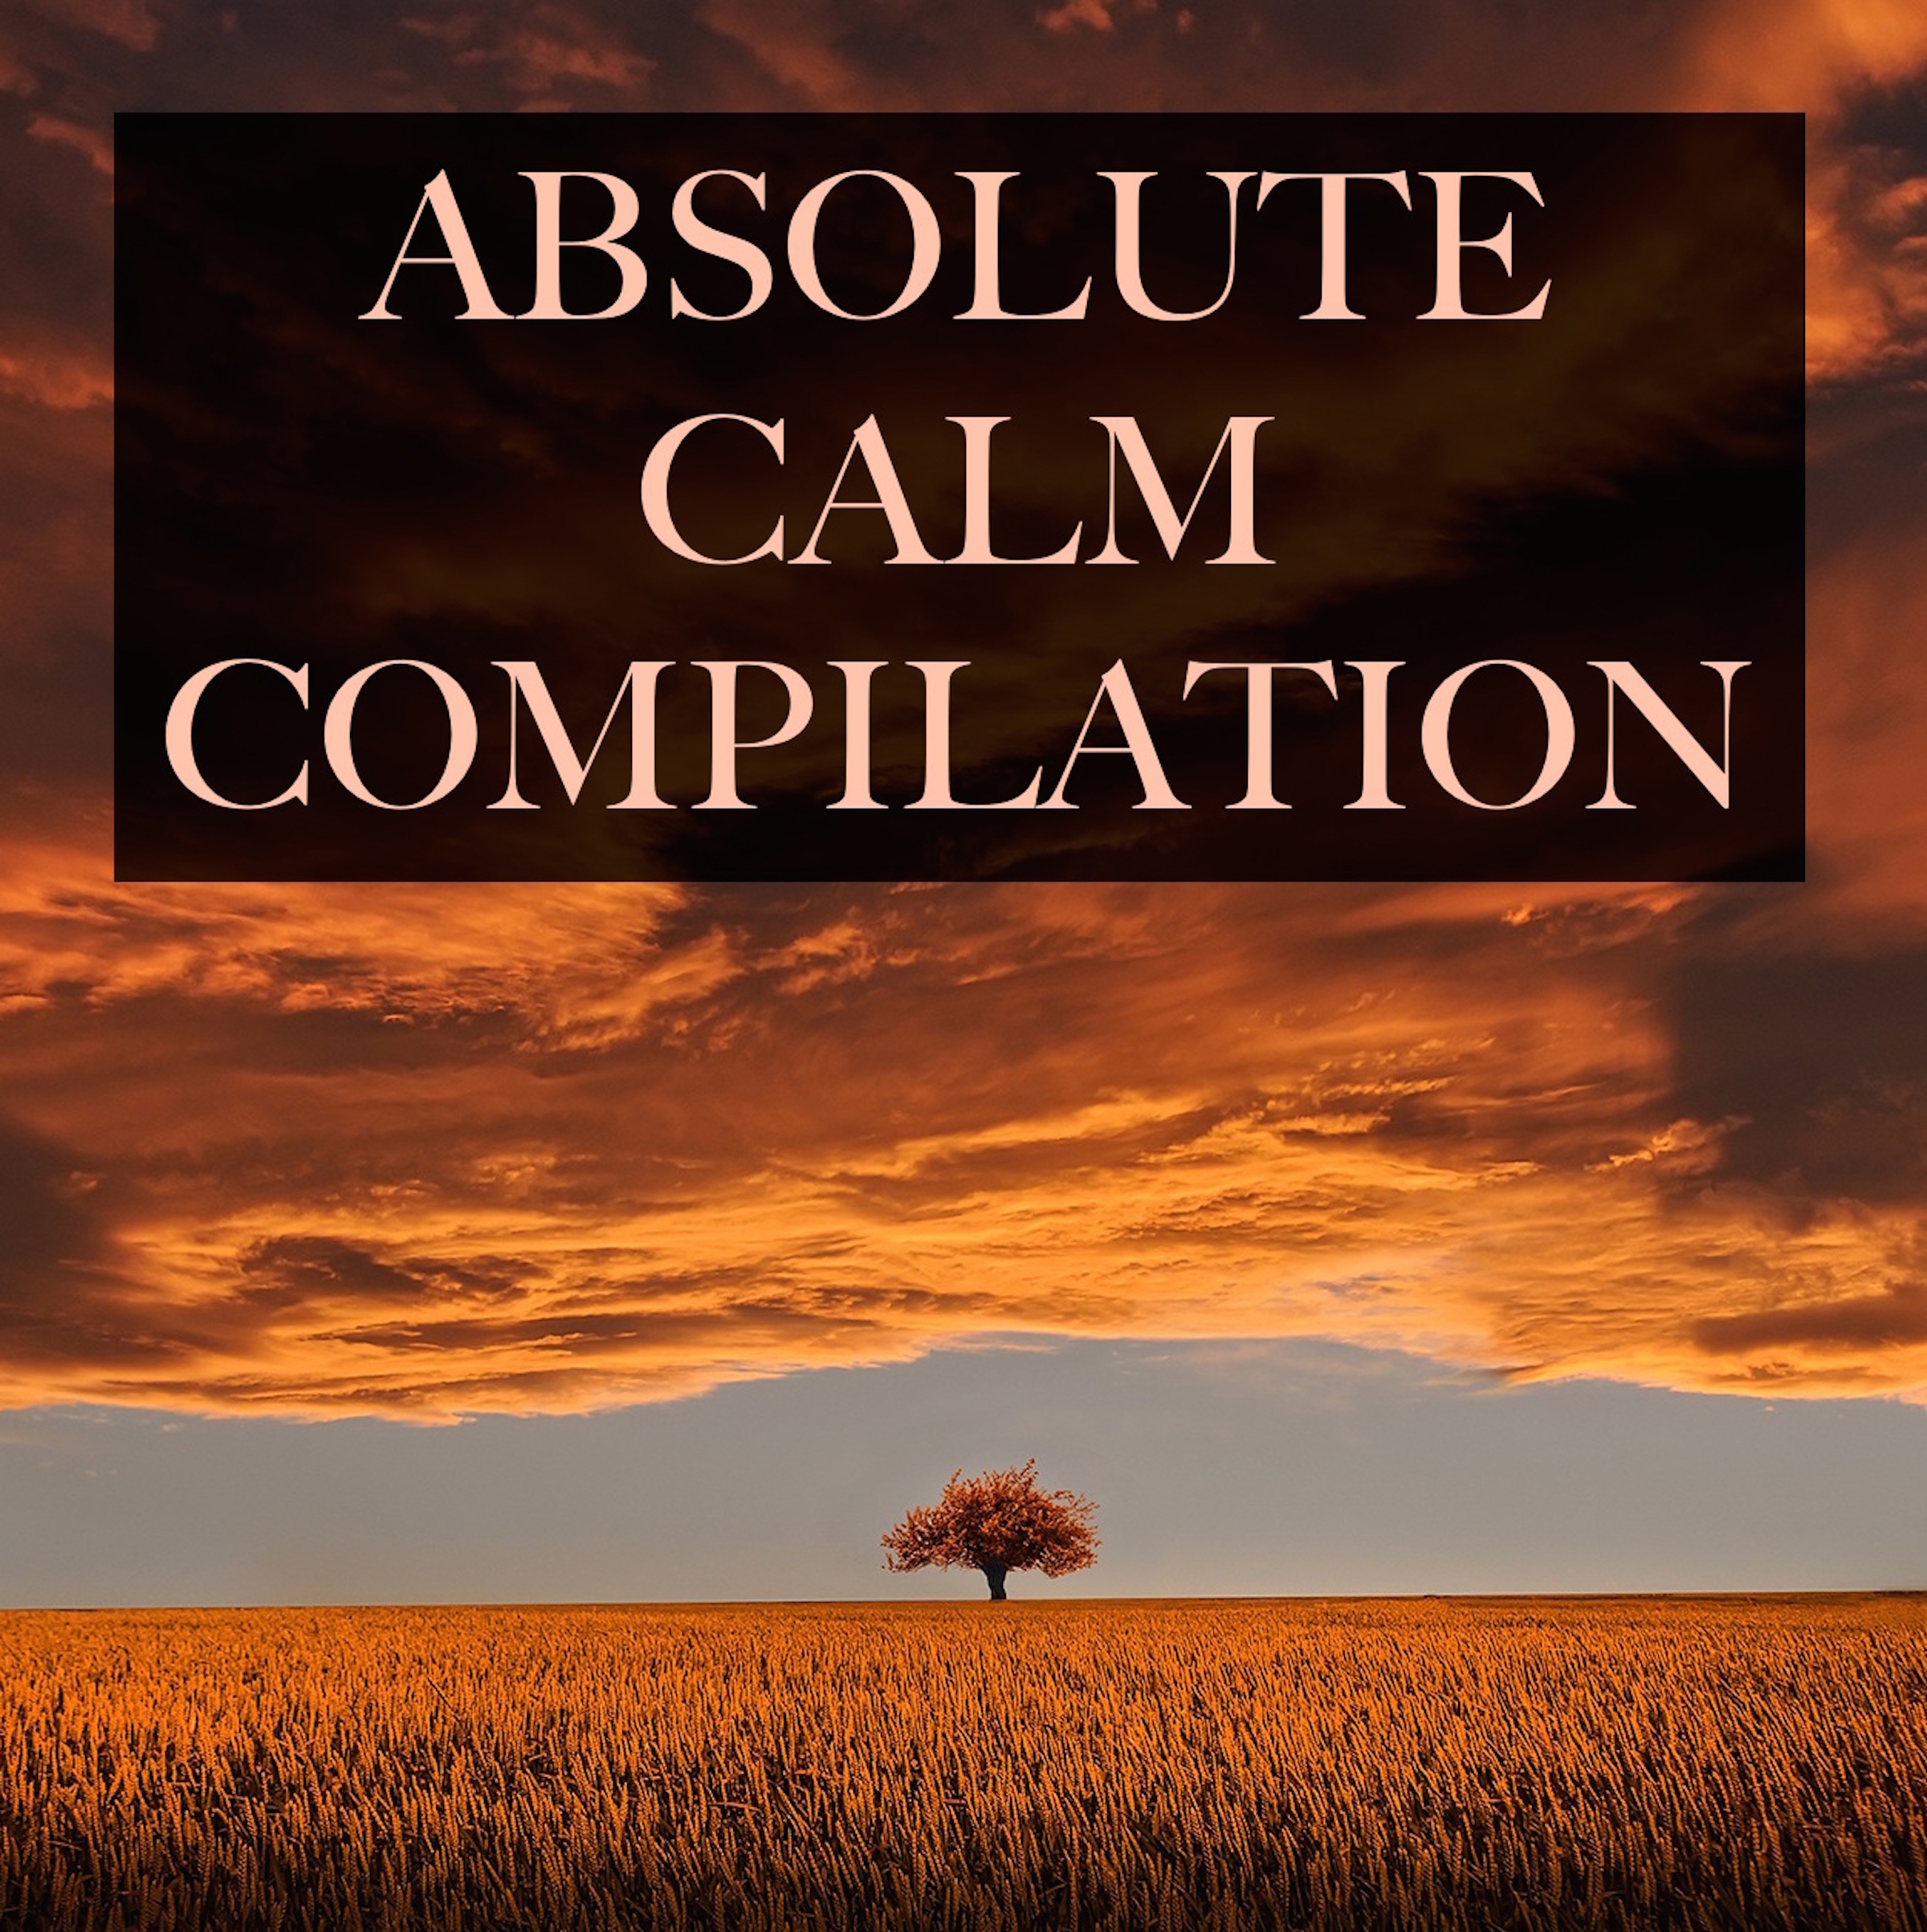 Absolute Calm Compilation - Pure Deep Sleep Musical Relaxation, and to Help with Yoga, Meditation, Complete Stress & Anxiety Relief and Healthier Living